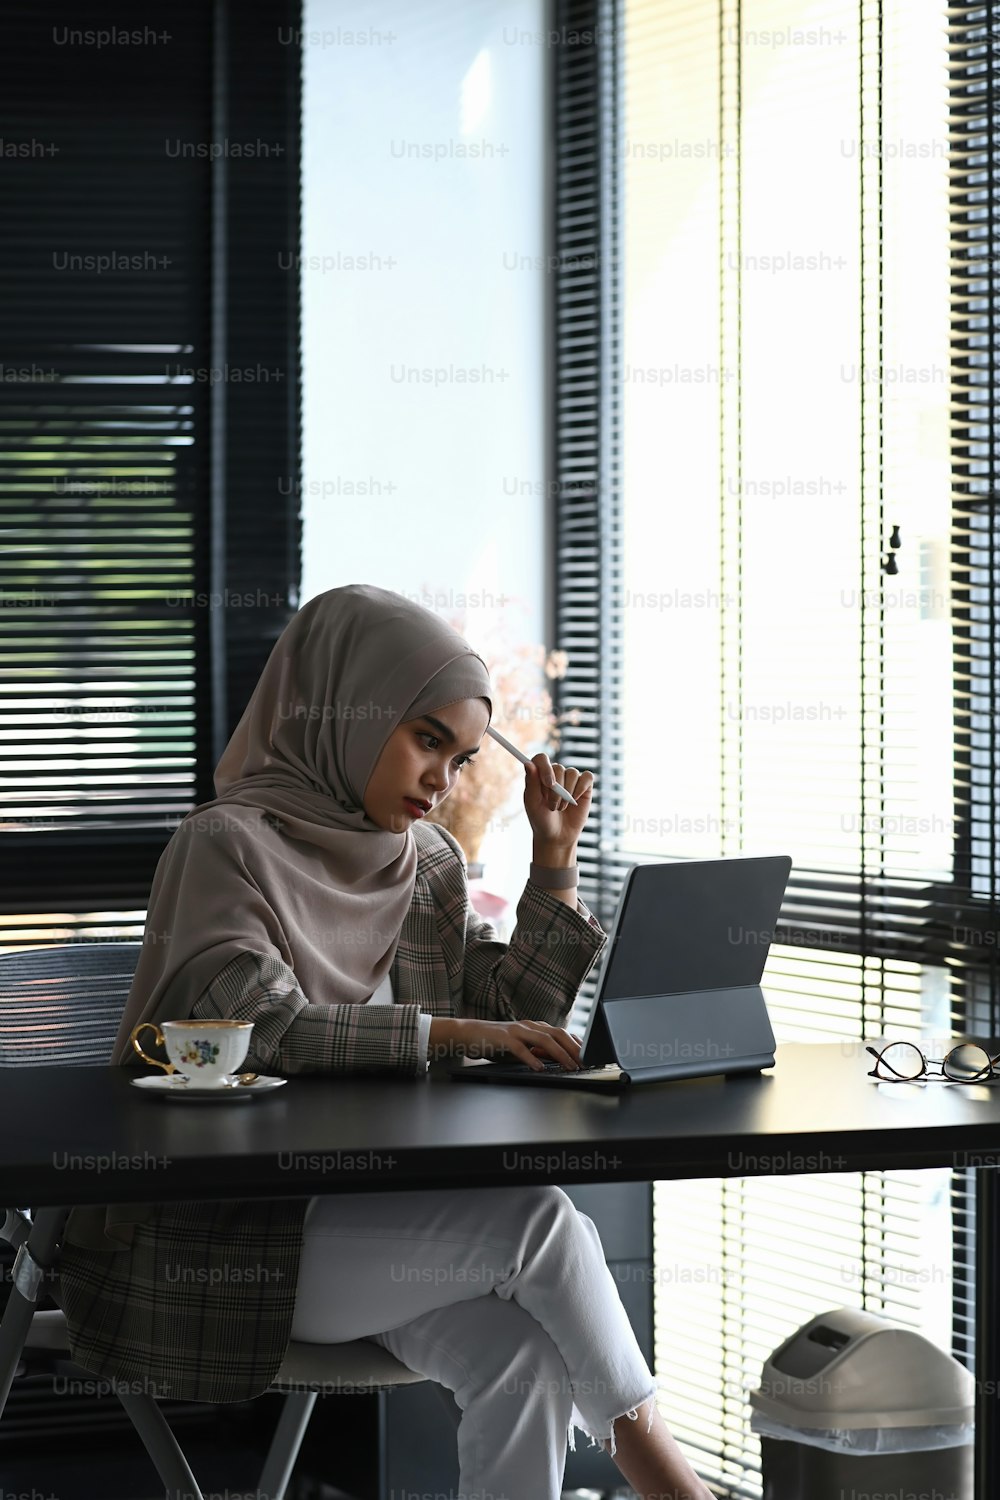 Portrait of muslim businesswoman in hijab working is thinking and working with tablet in the office.